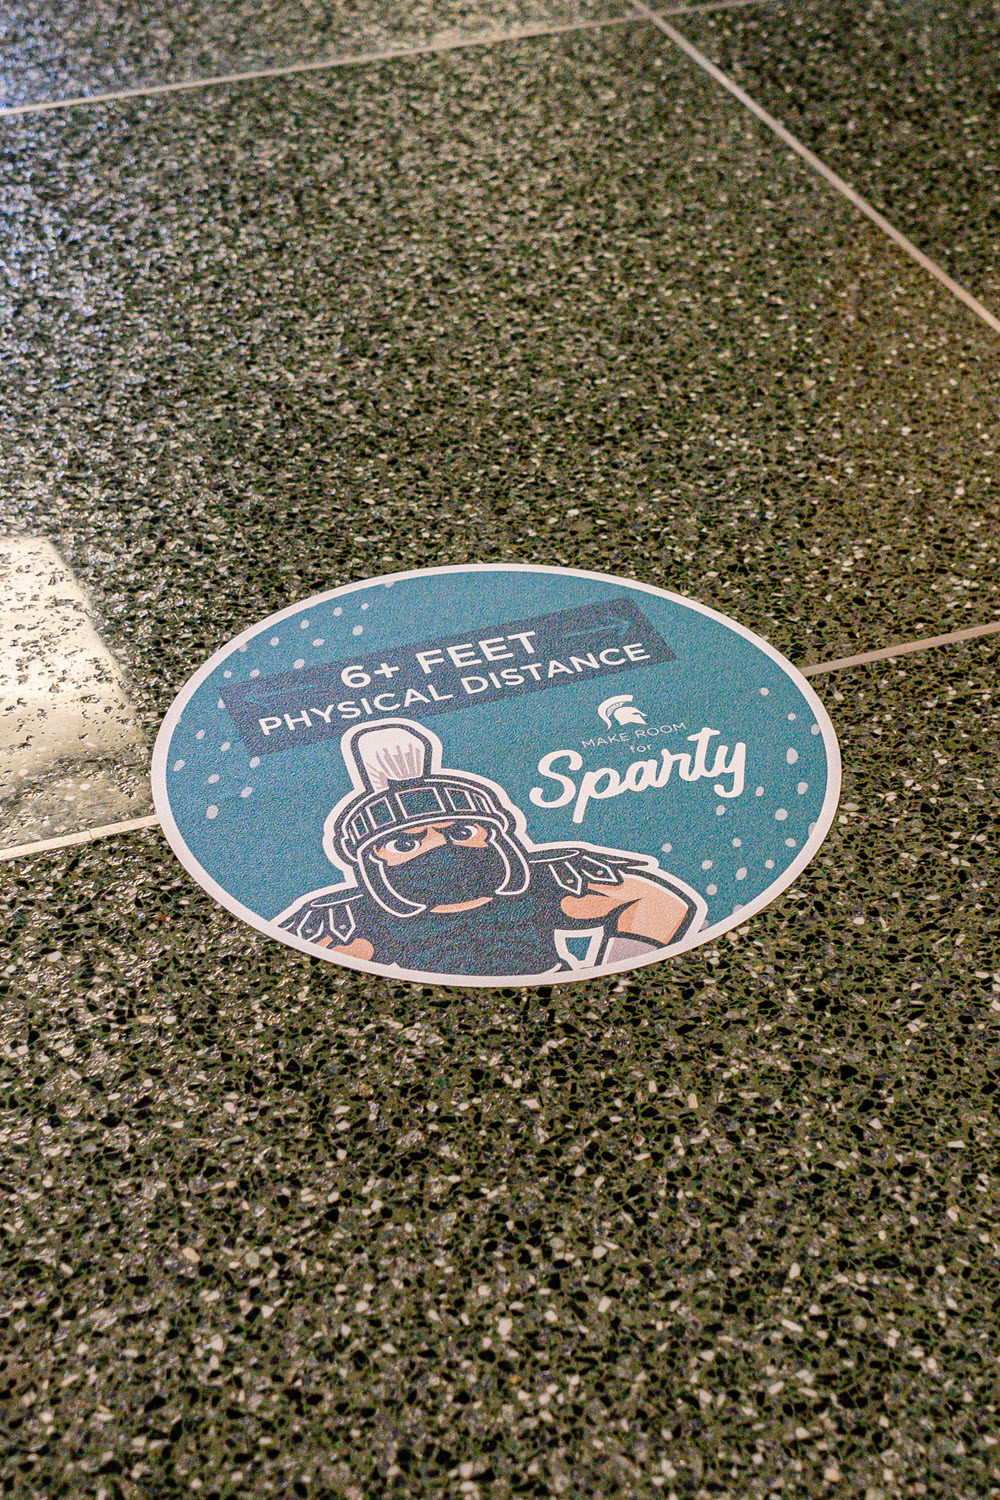 Example of floor decal to encourage physical distancing